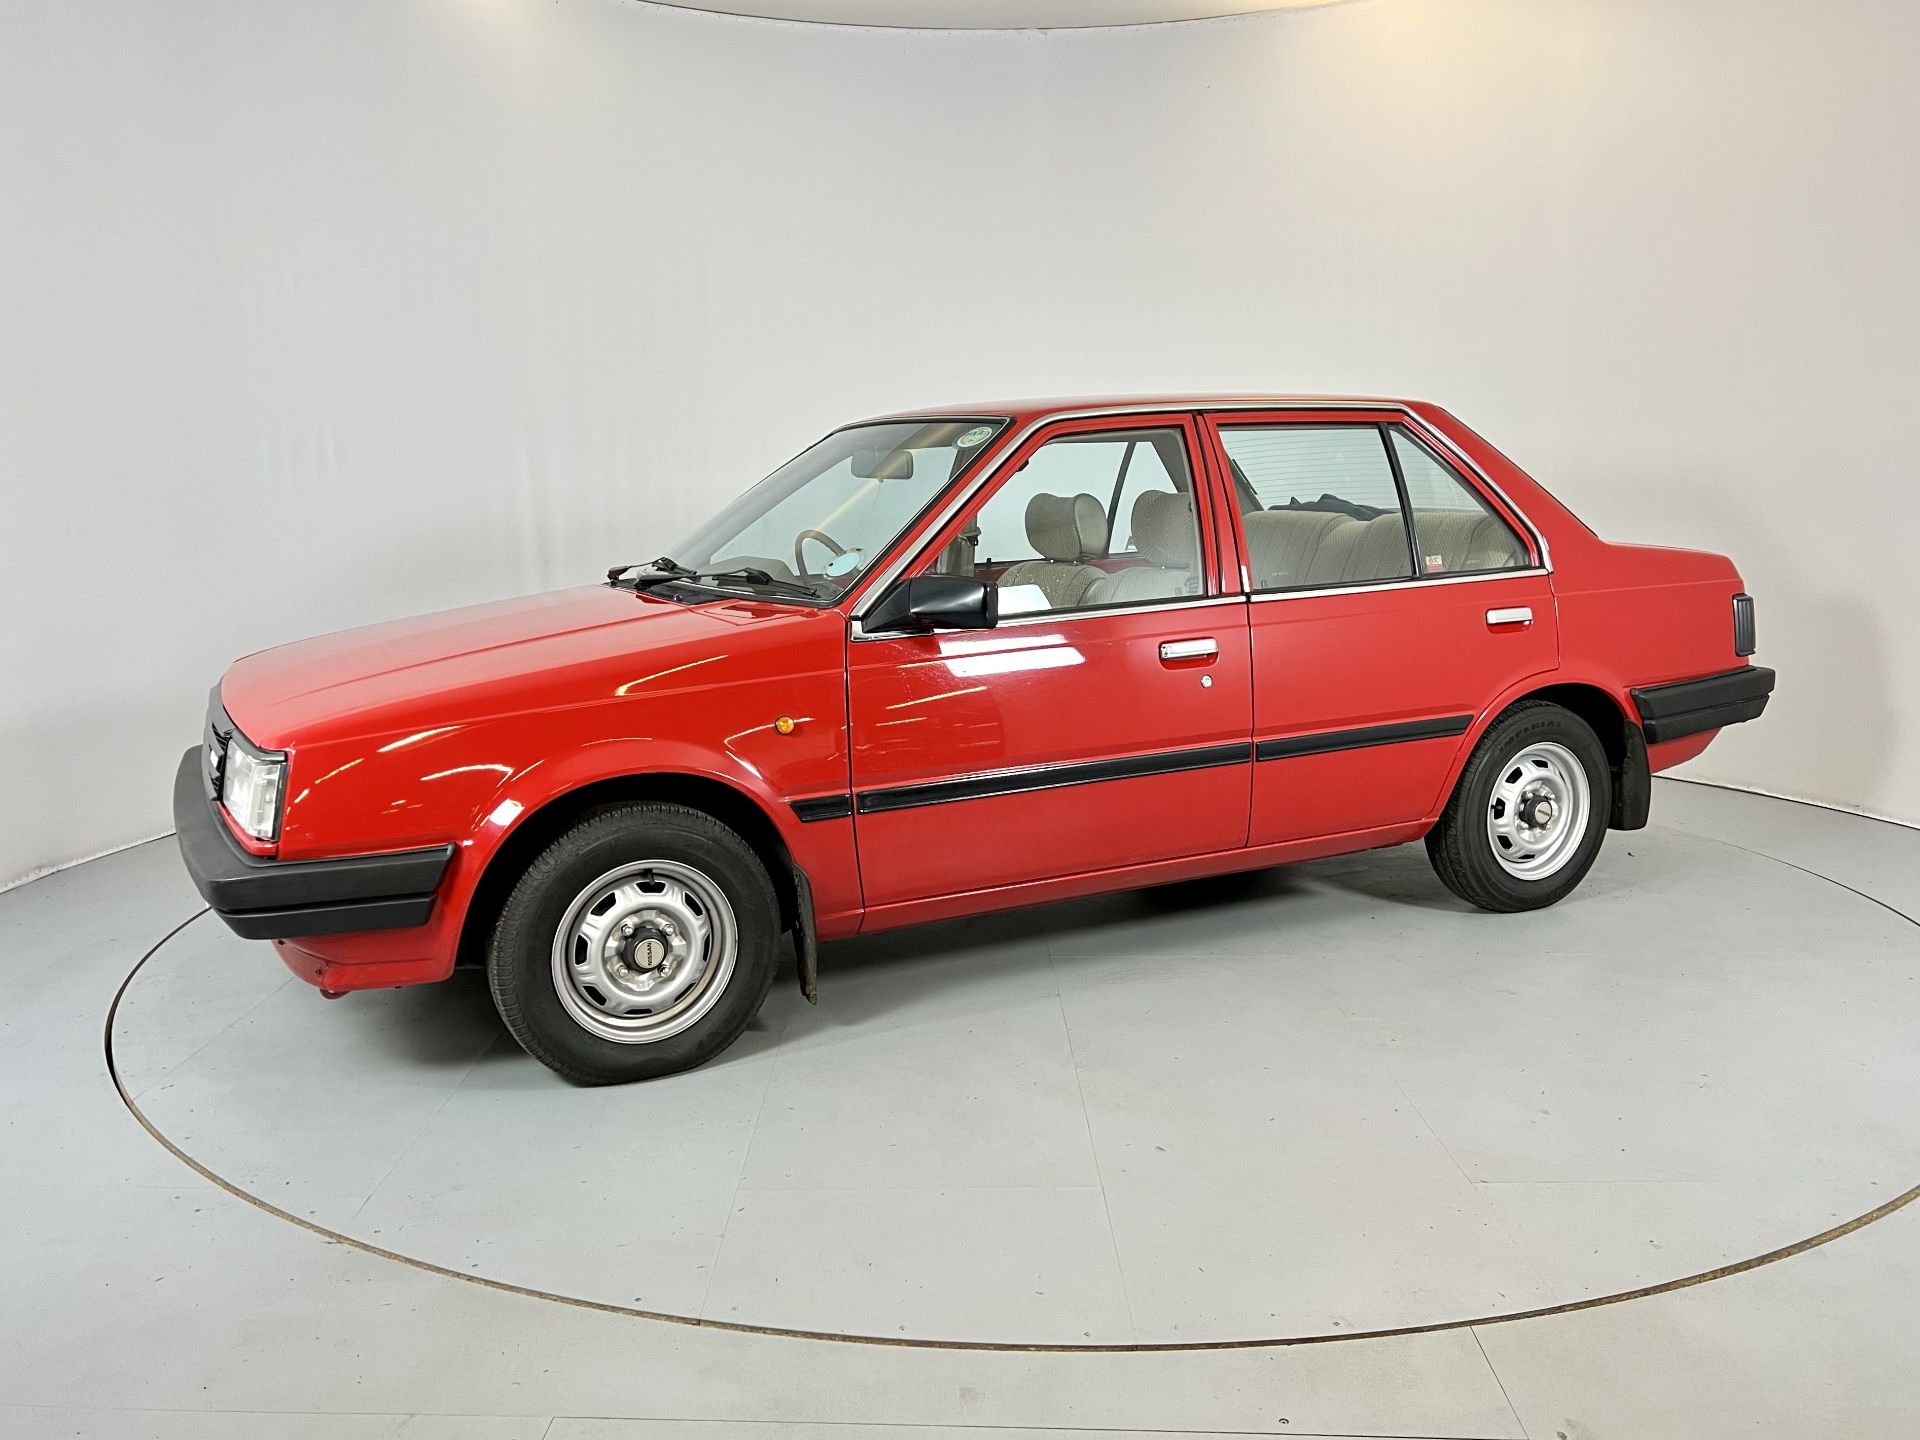 Nissan Sunny - Image 4 of 35